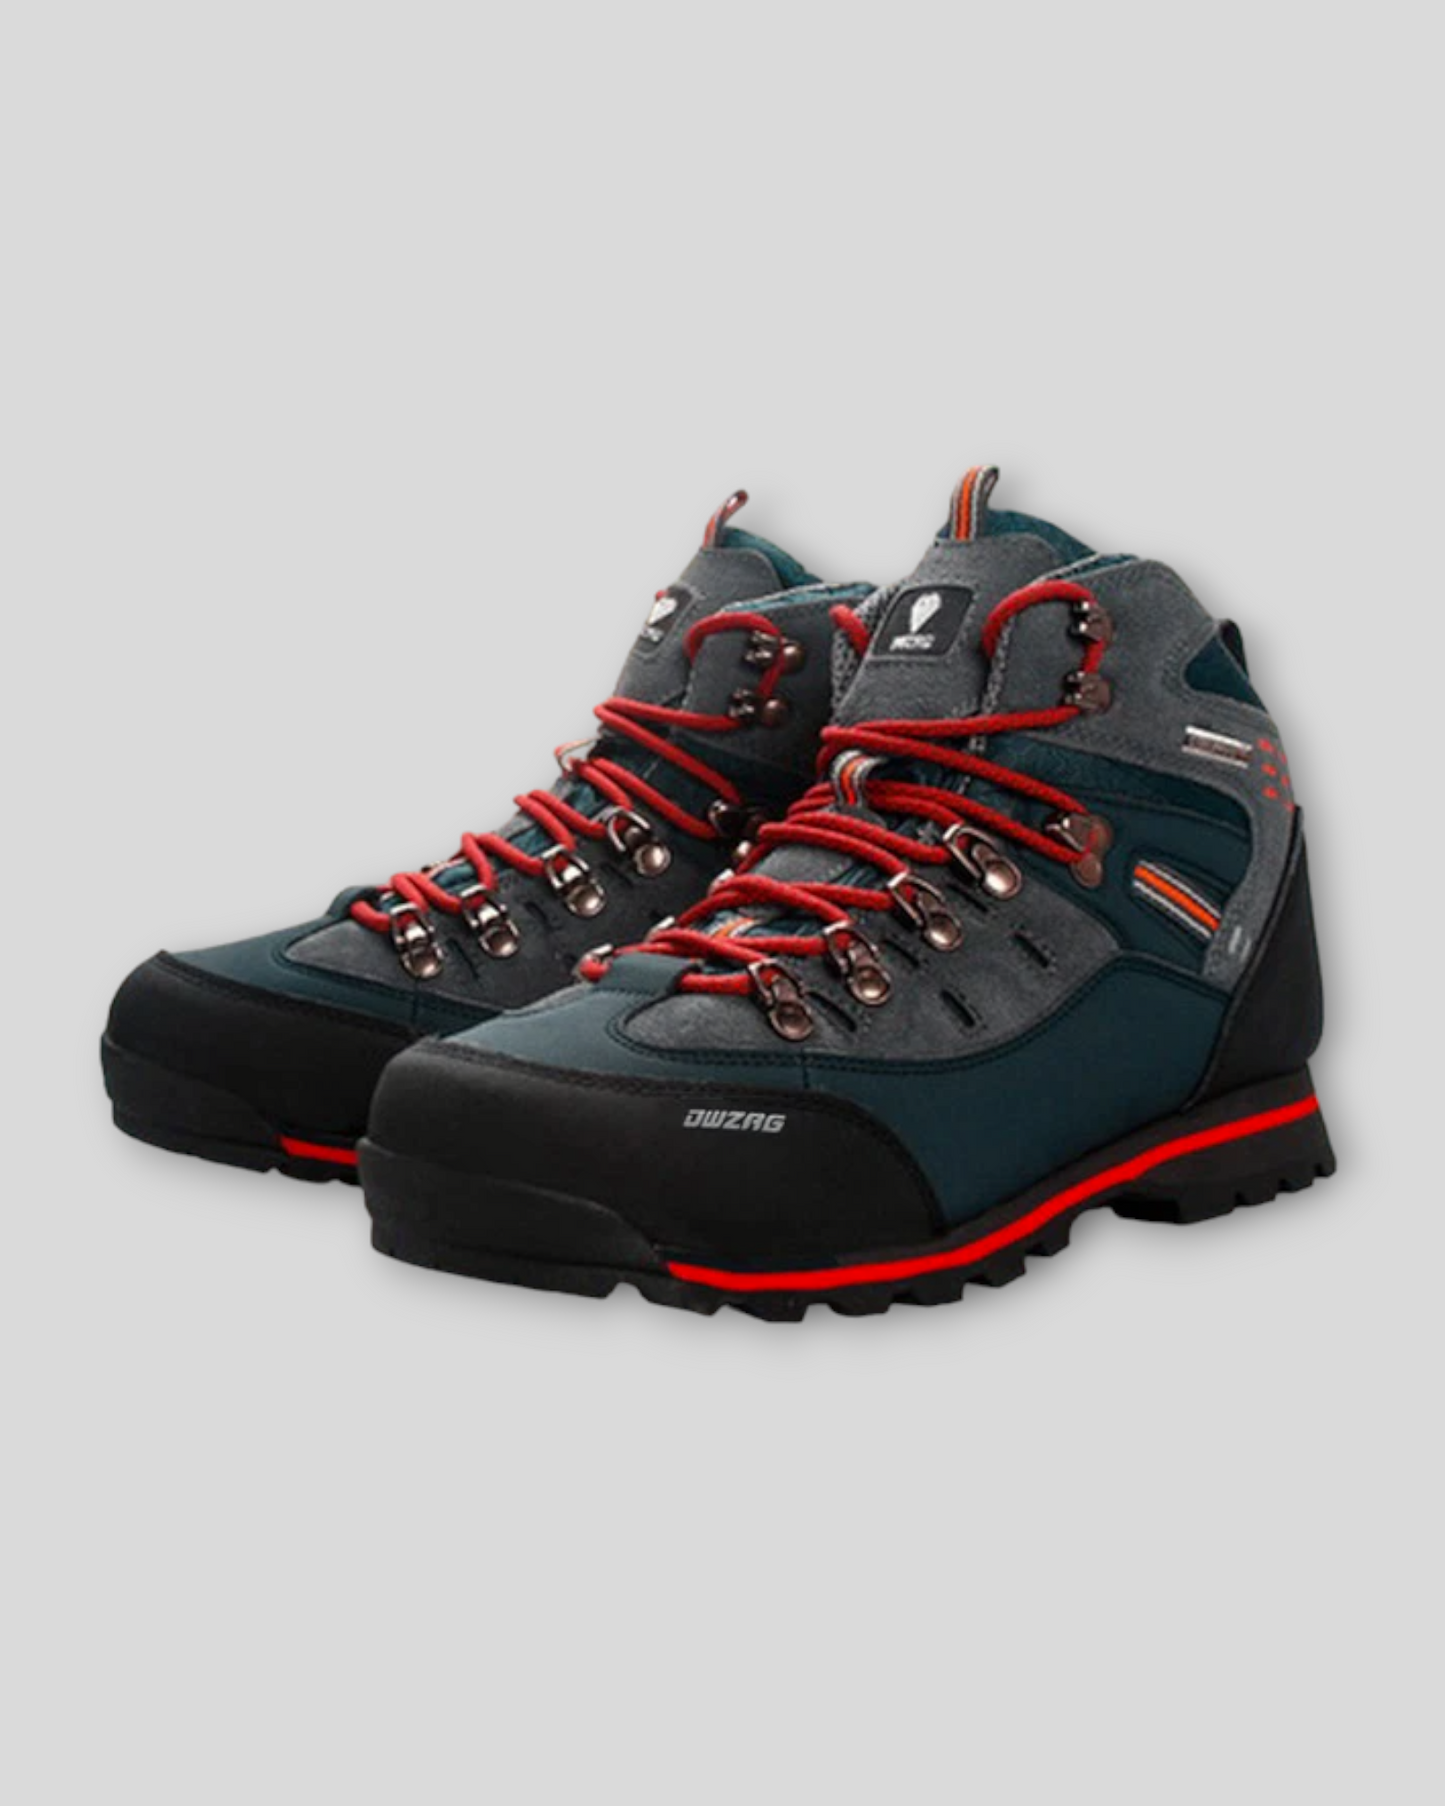 Men's Hiking and Climbing Blue Shoes/Boots